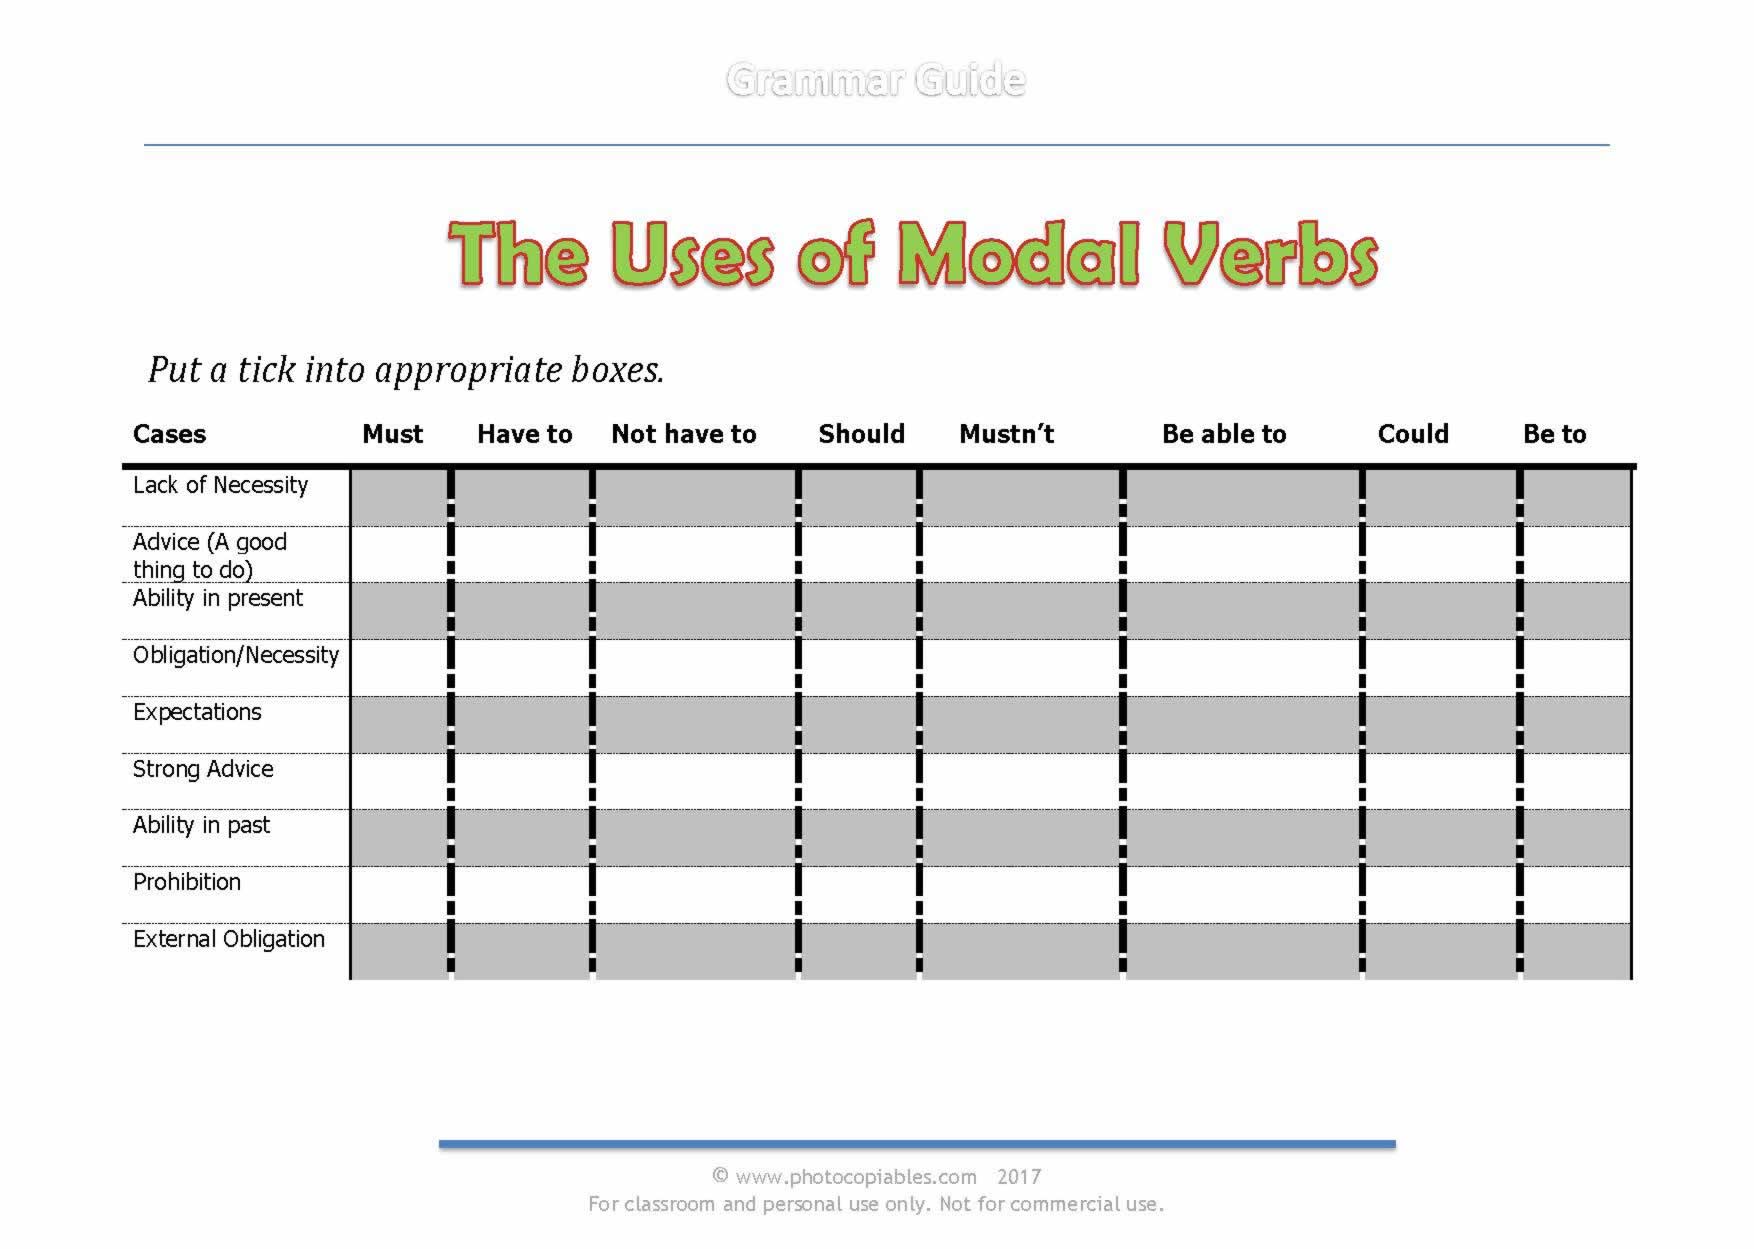 The Uses of Modal Verbs | photocopiables